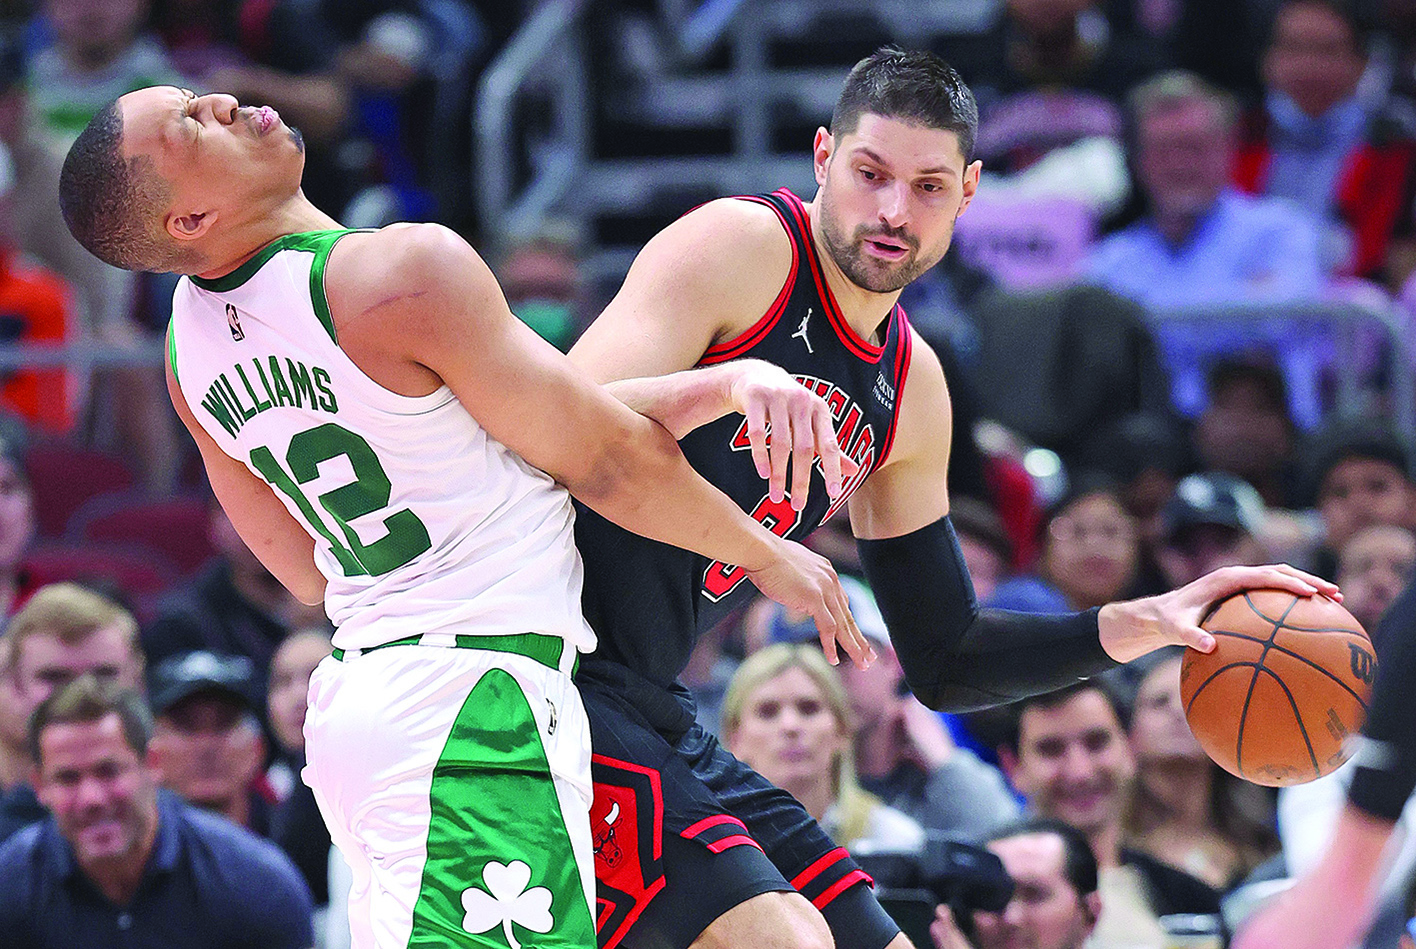 CHICAGO: Nikola Vucevic #9 of the Chicago Bulls moves against Grant Williams #12 of the Boston Celtics after a collision at the United Center on April 6, 2022. - AFP